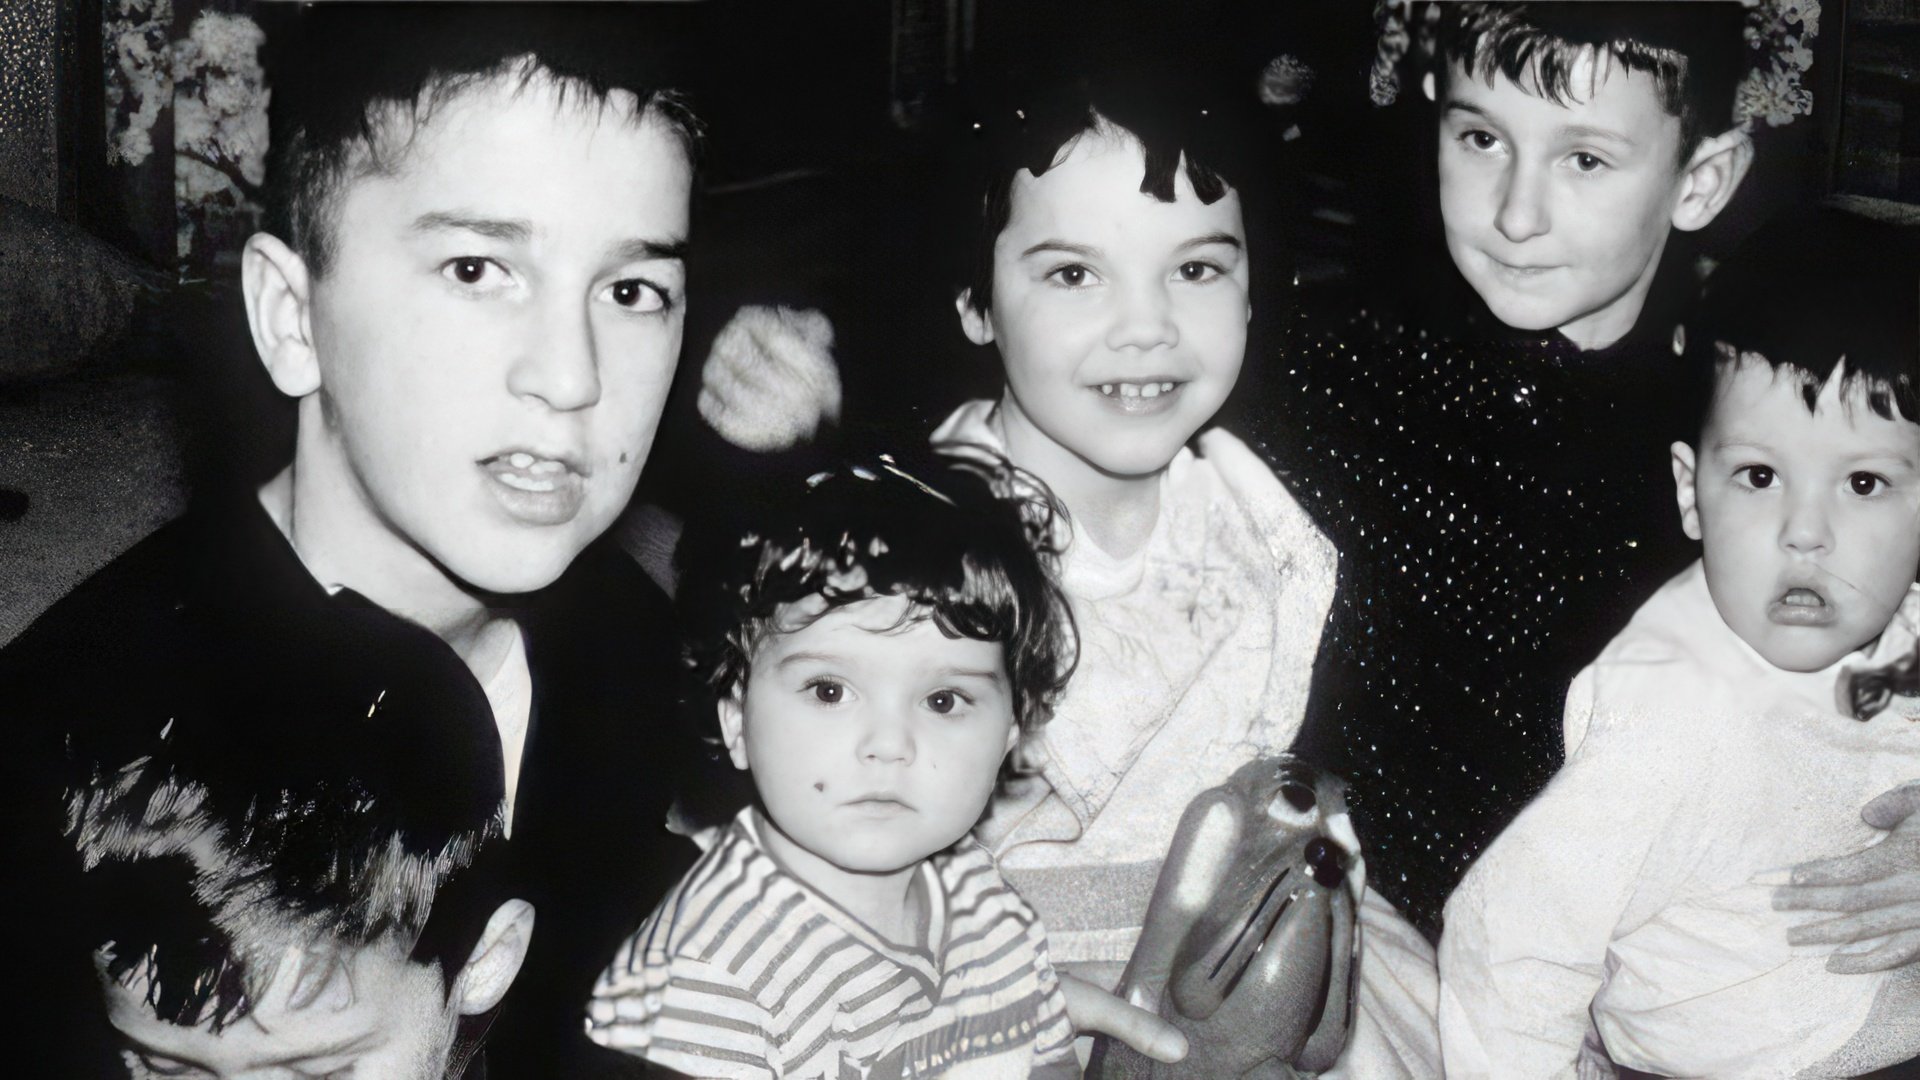 Madonna (in the center) with brothers and sister